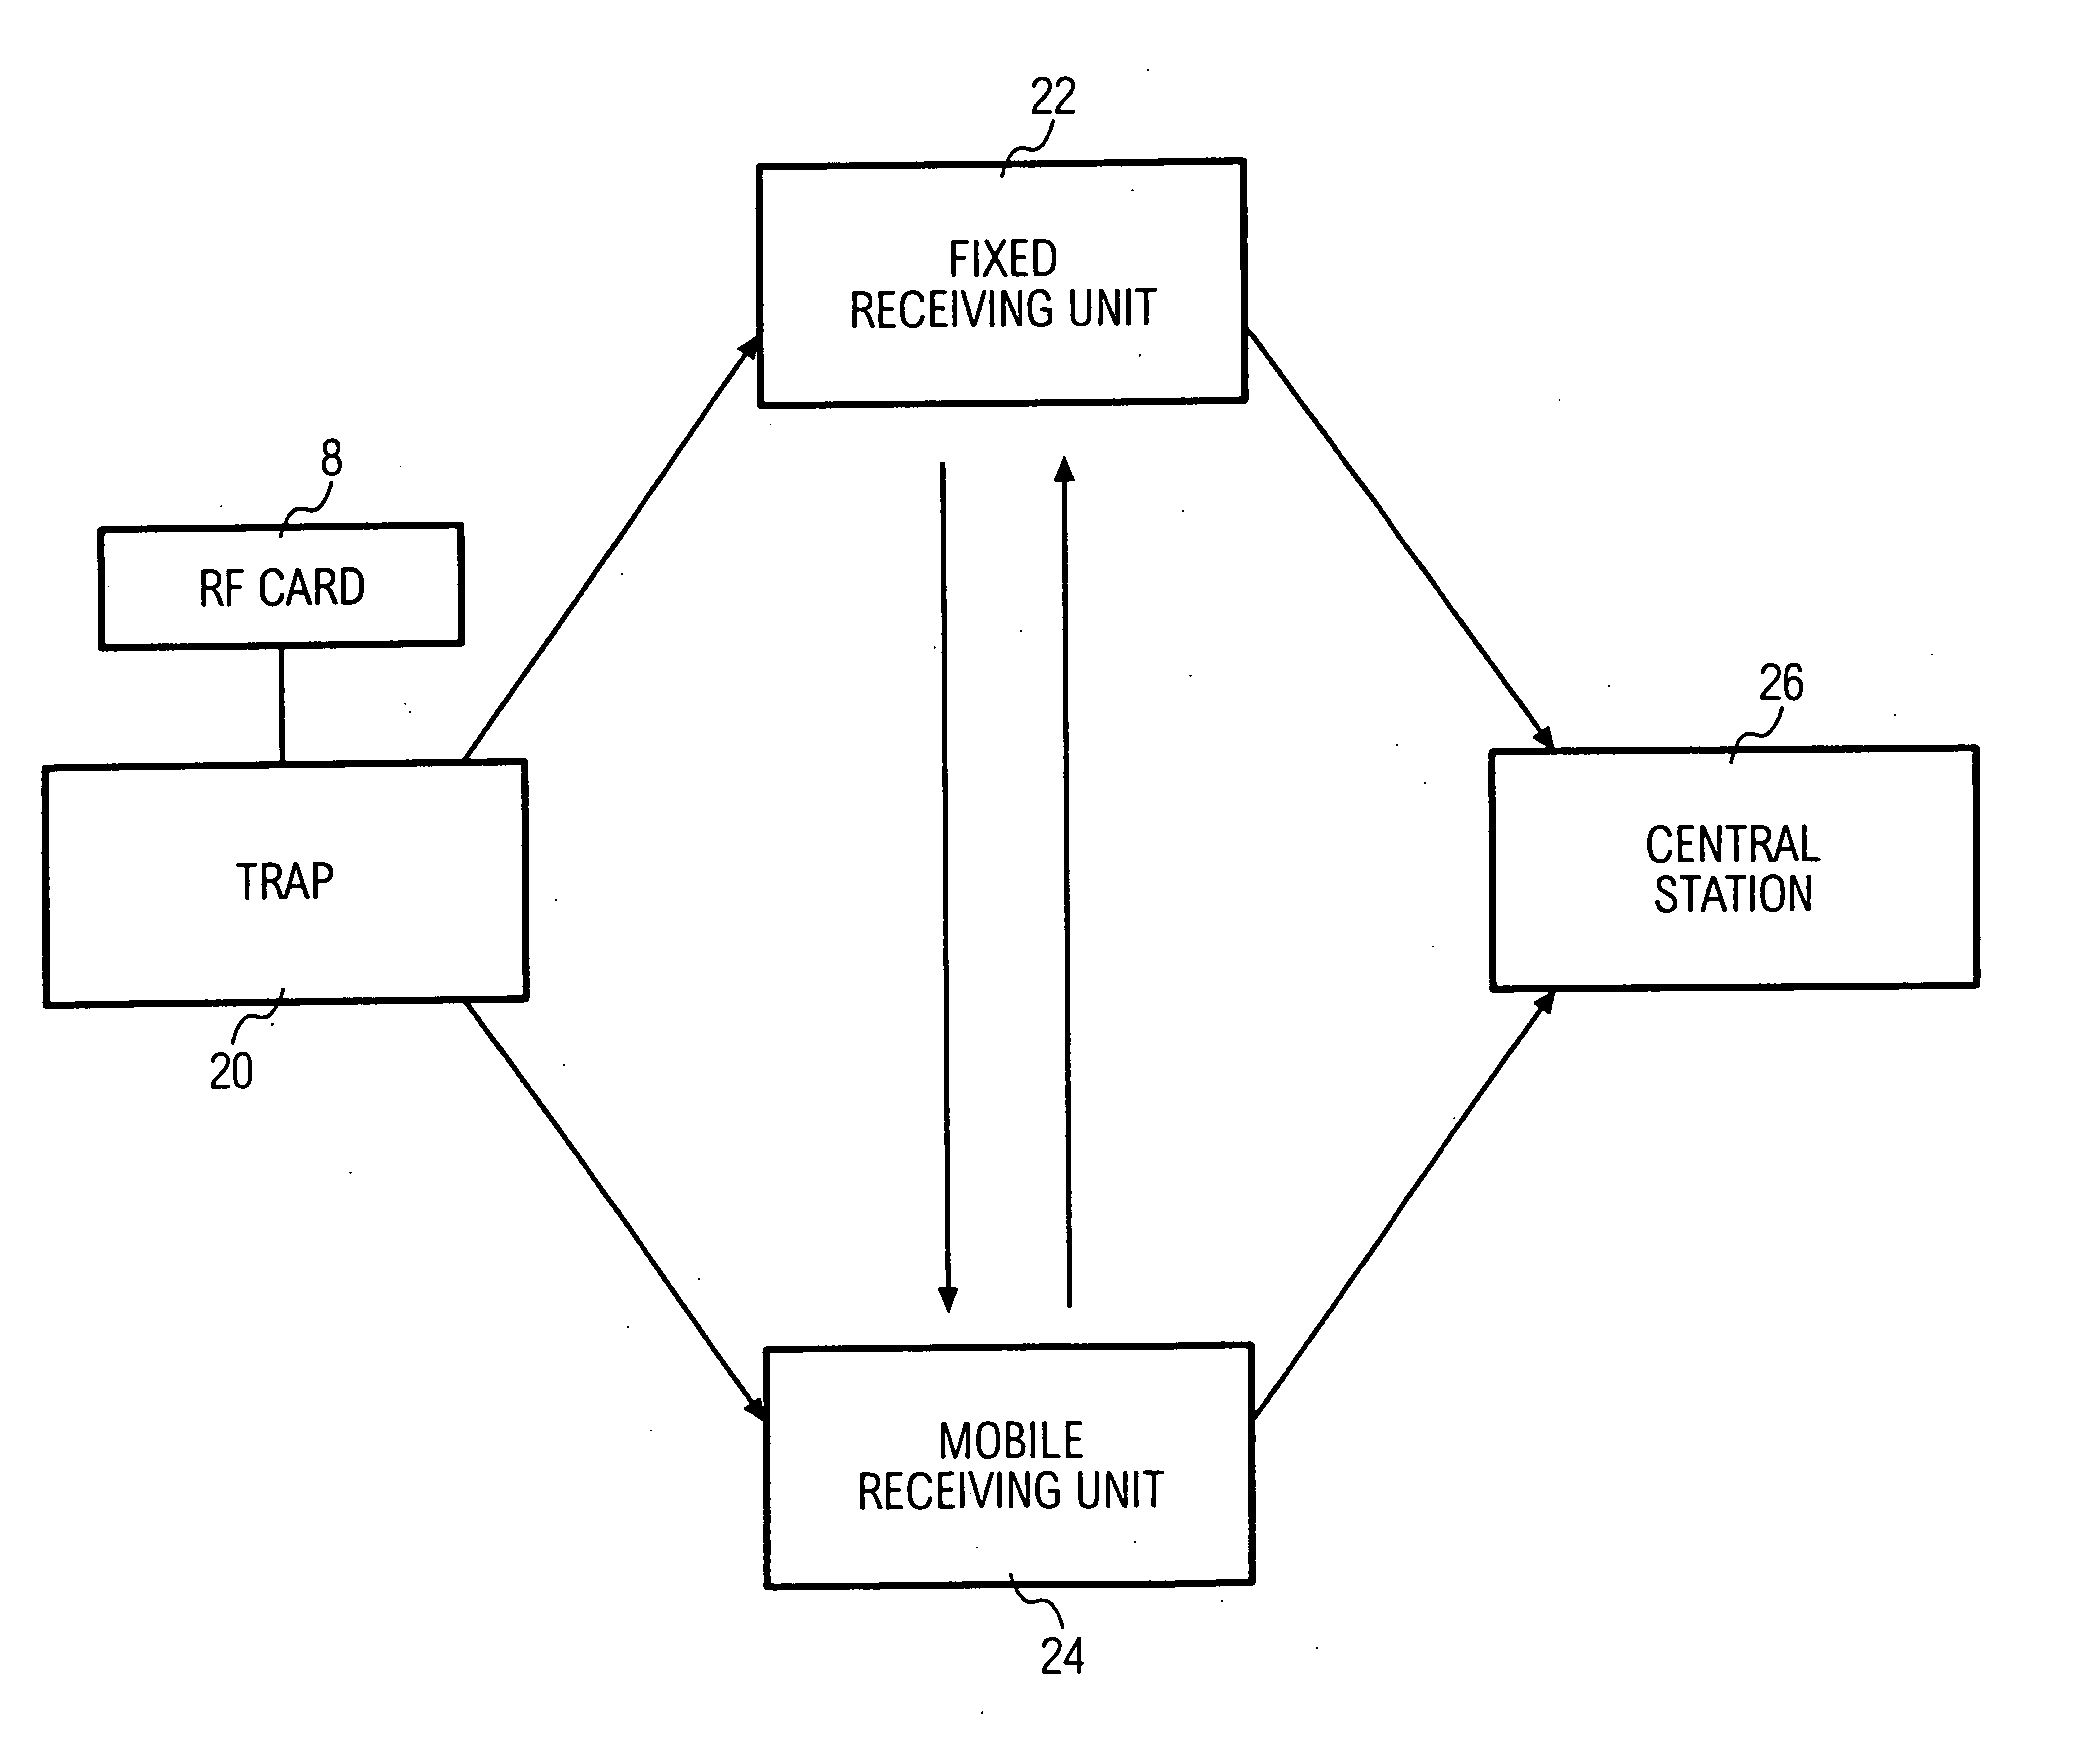 Method and apparatus for determining the occurrence of animal incidence